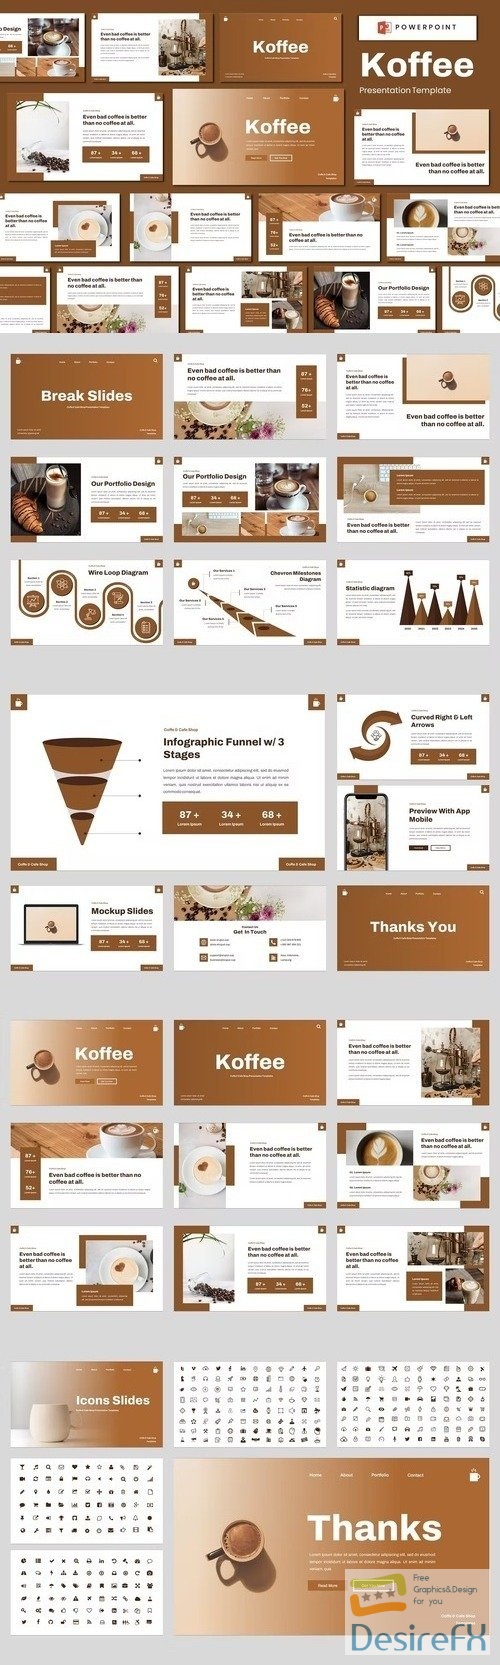 Koffee - Coffe & Cafe Shop Powerpoint Template